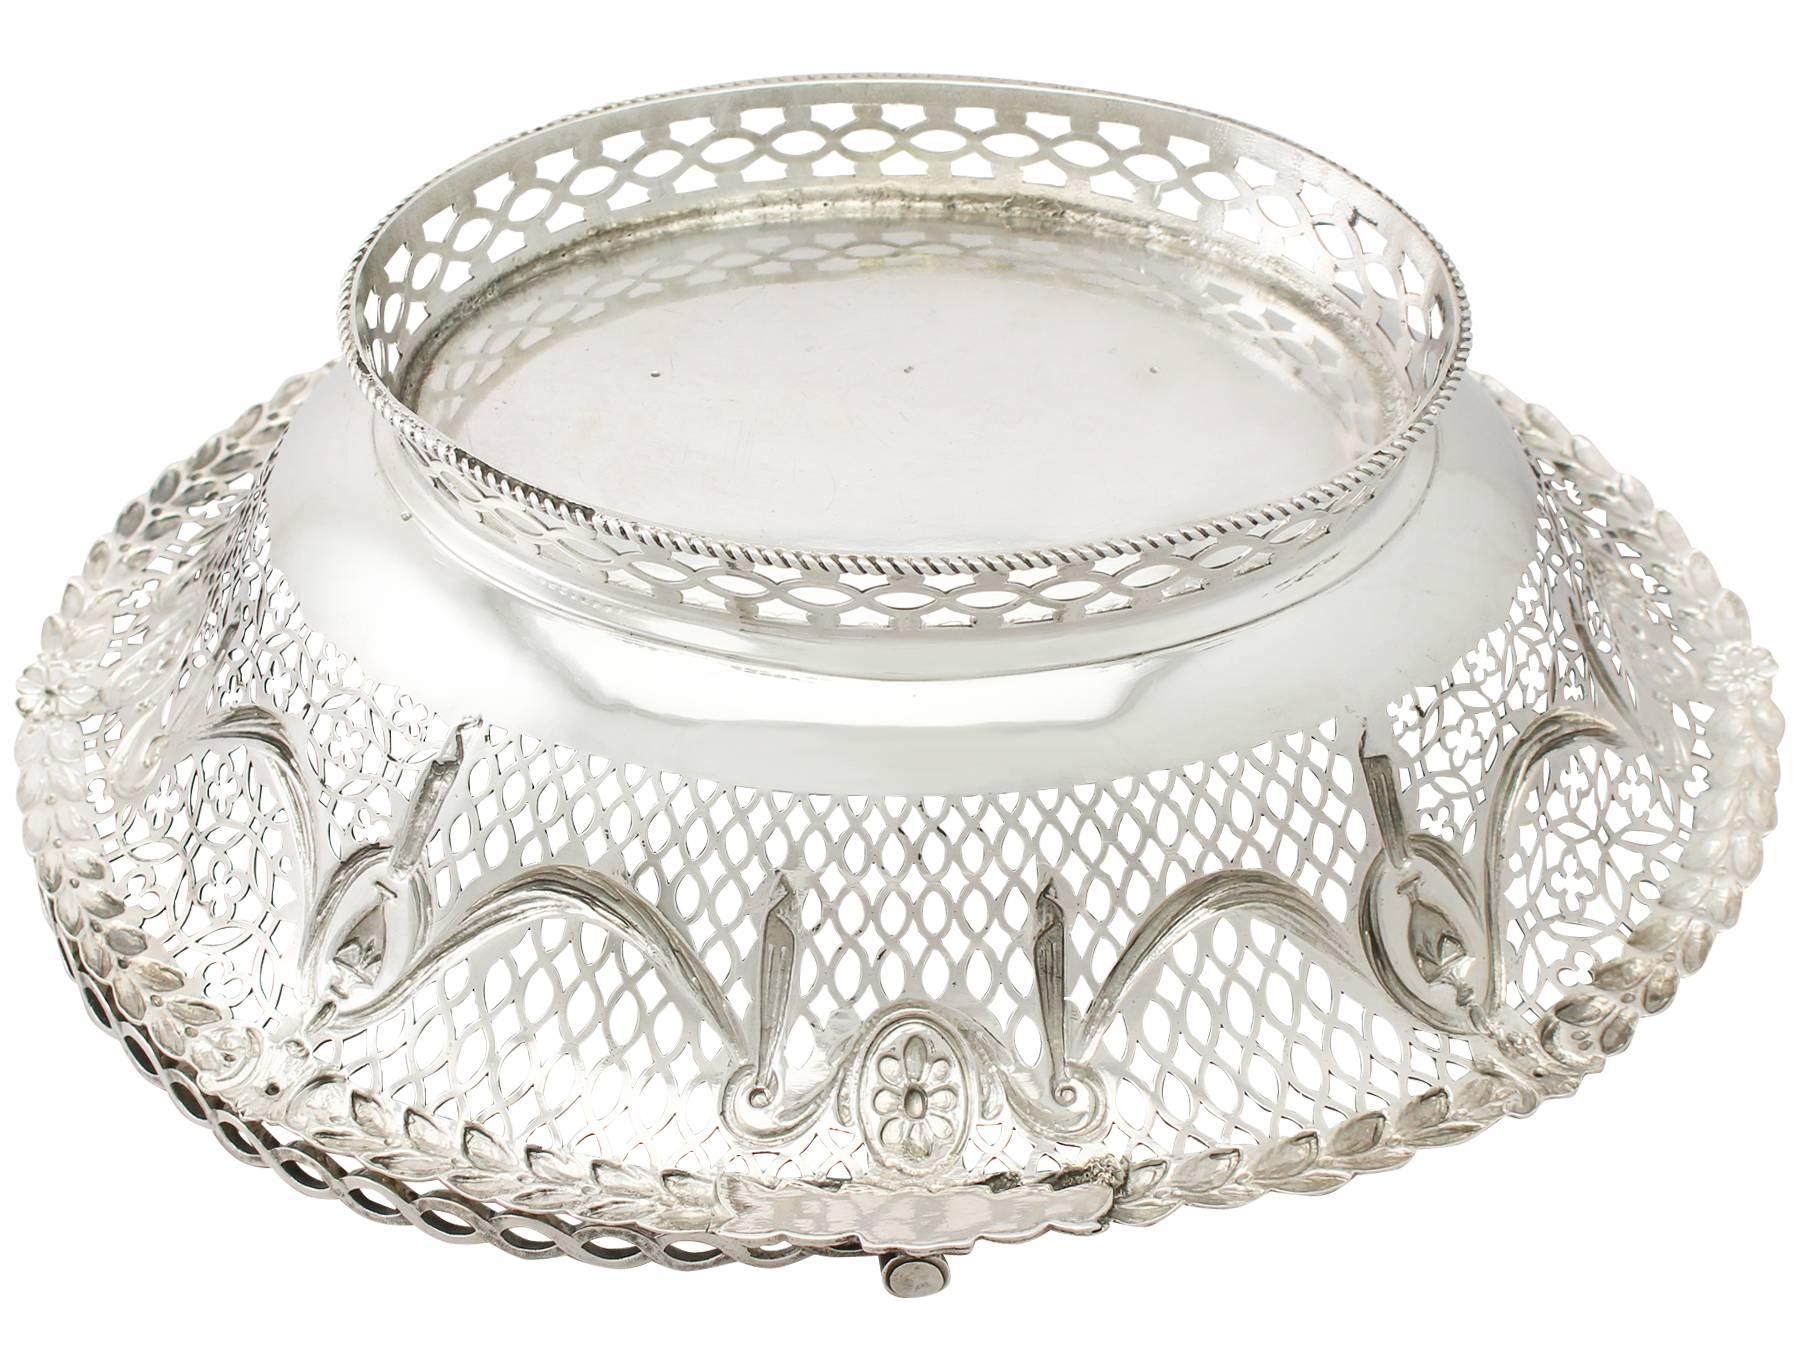 Late 18th Century Antique Sterling Silver Cake Basket 